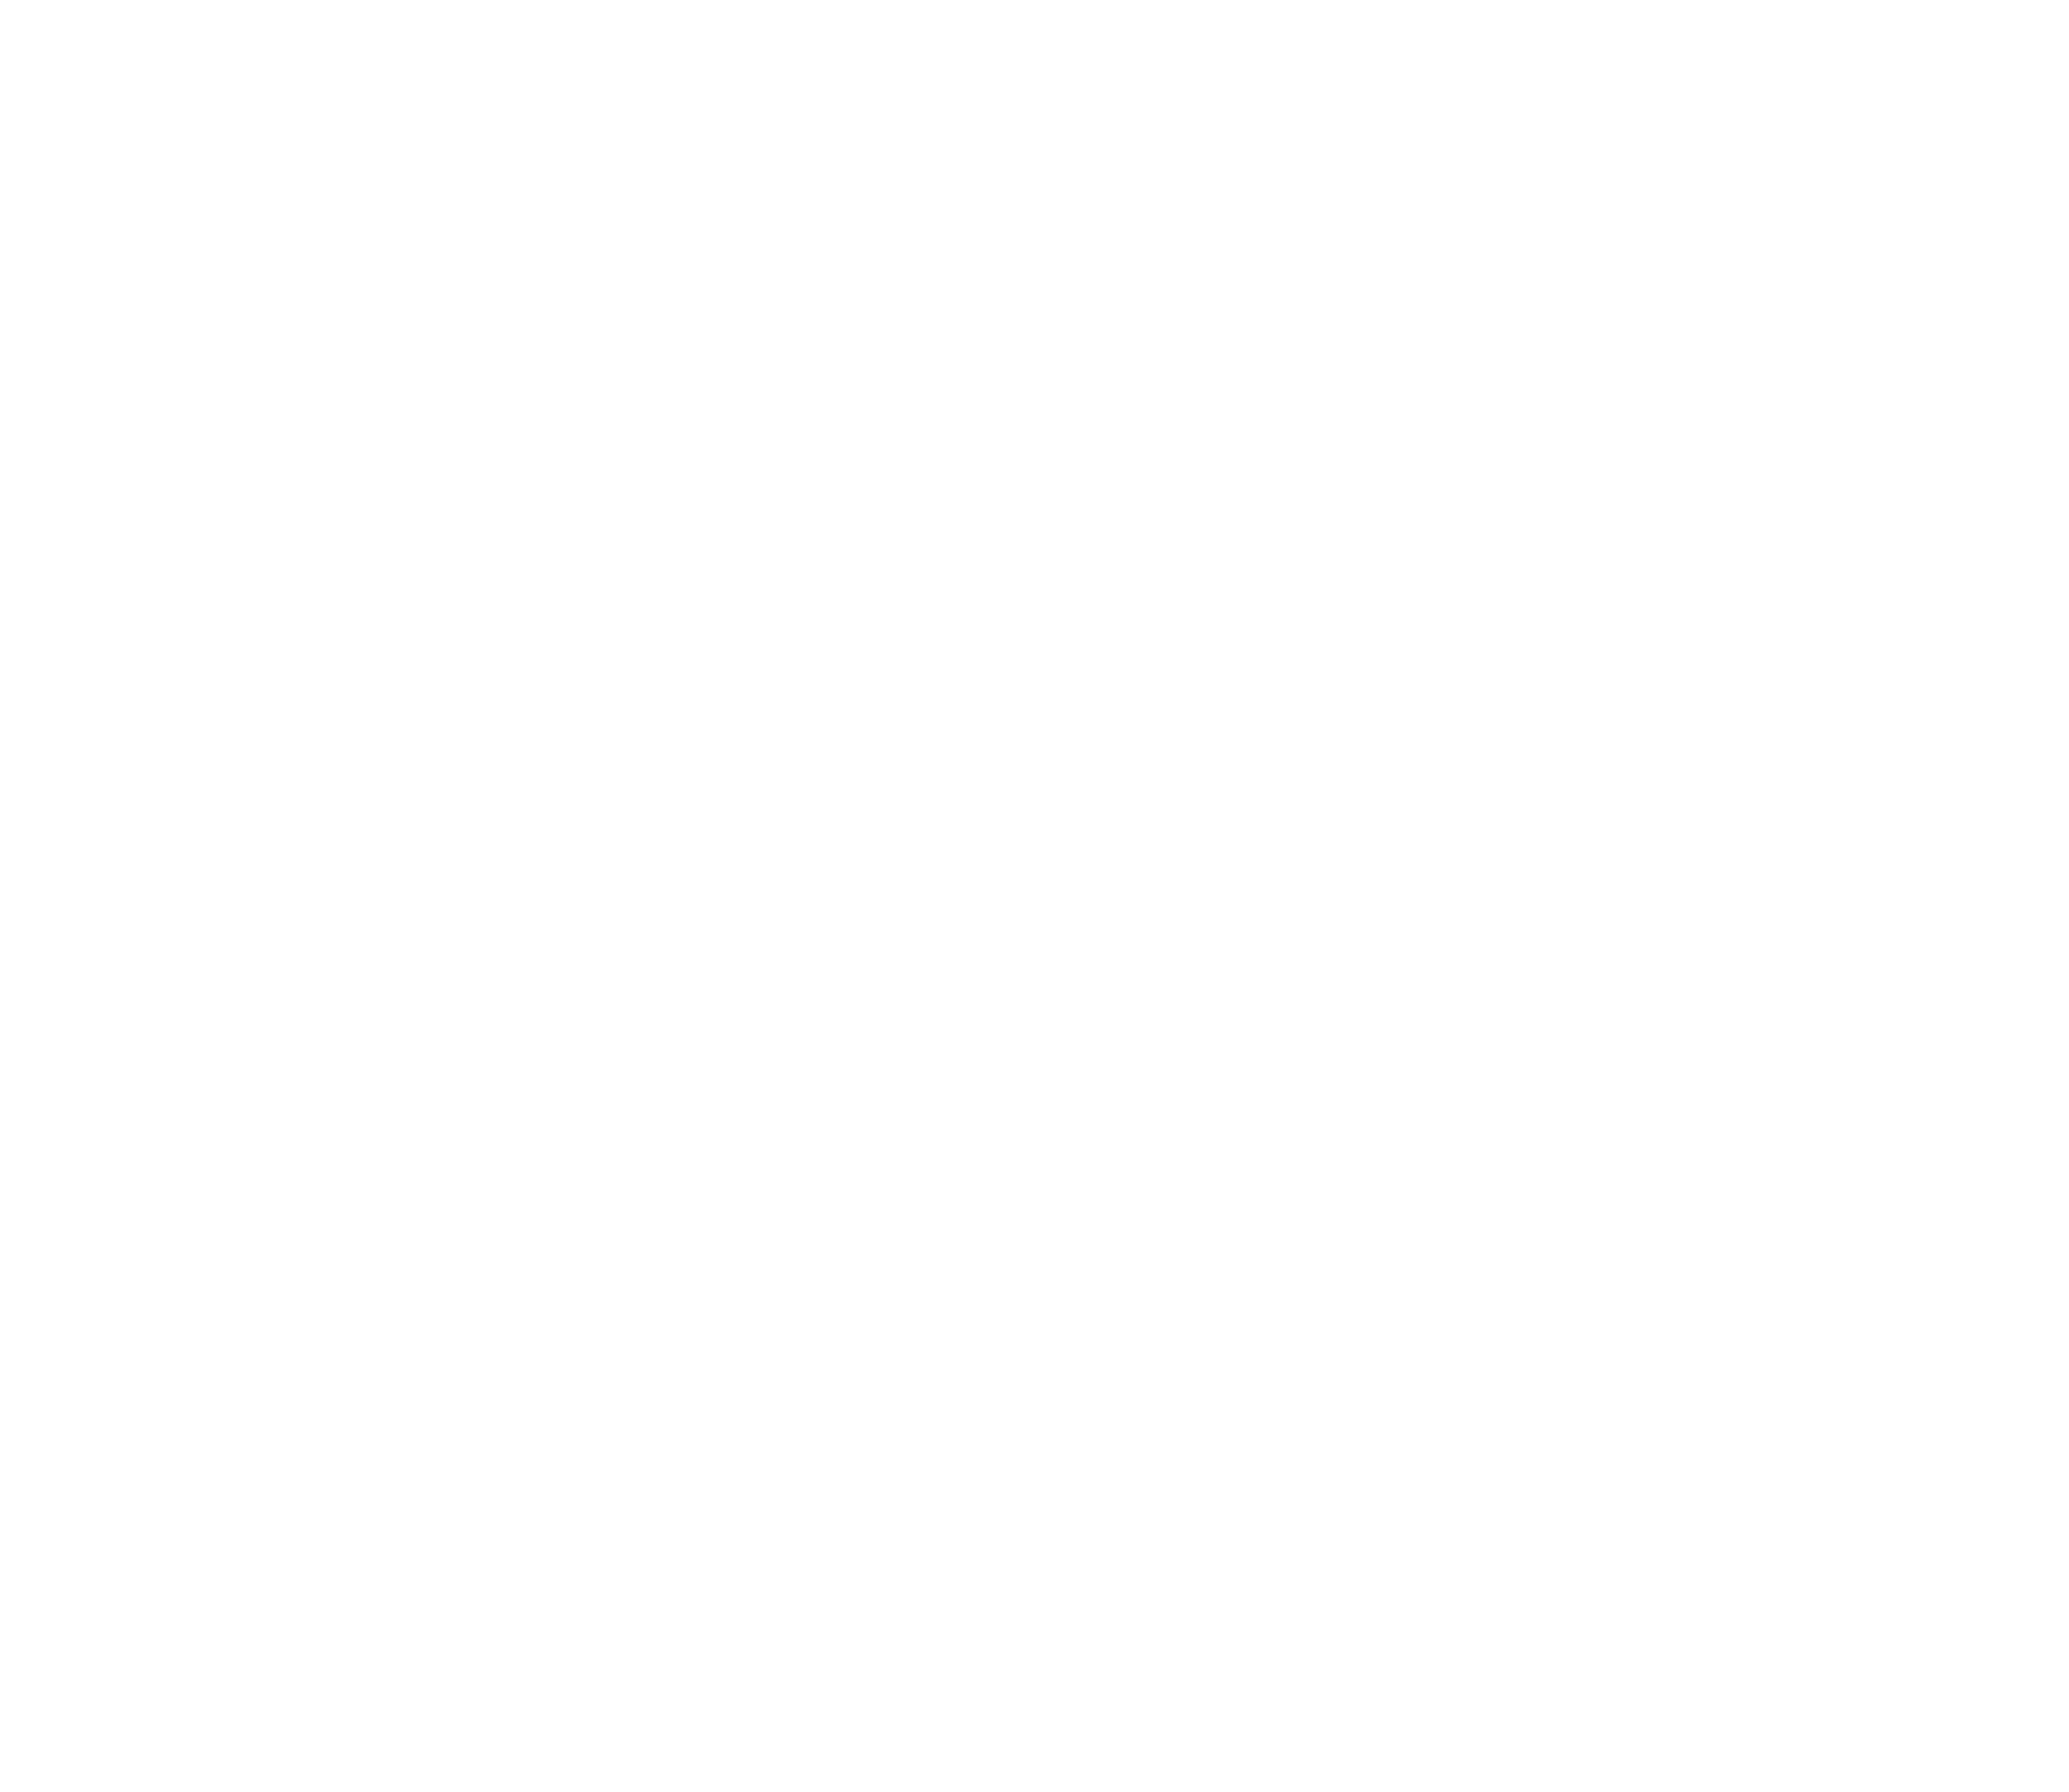 The Arch Summit